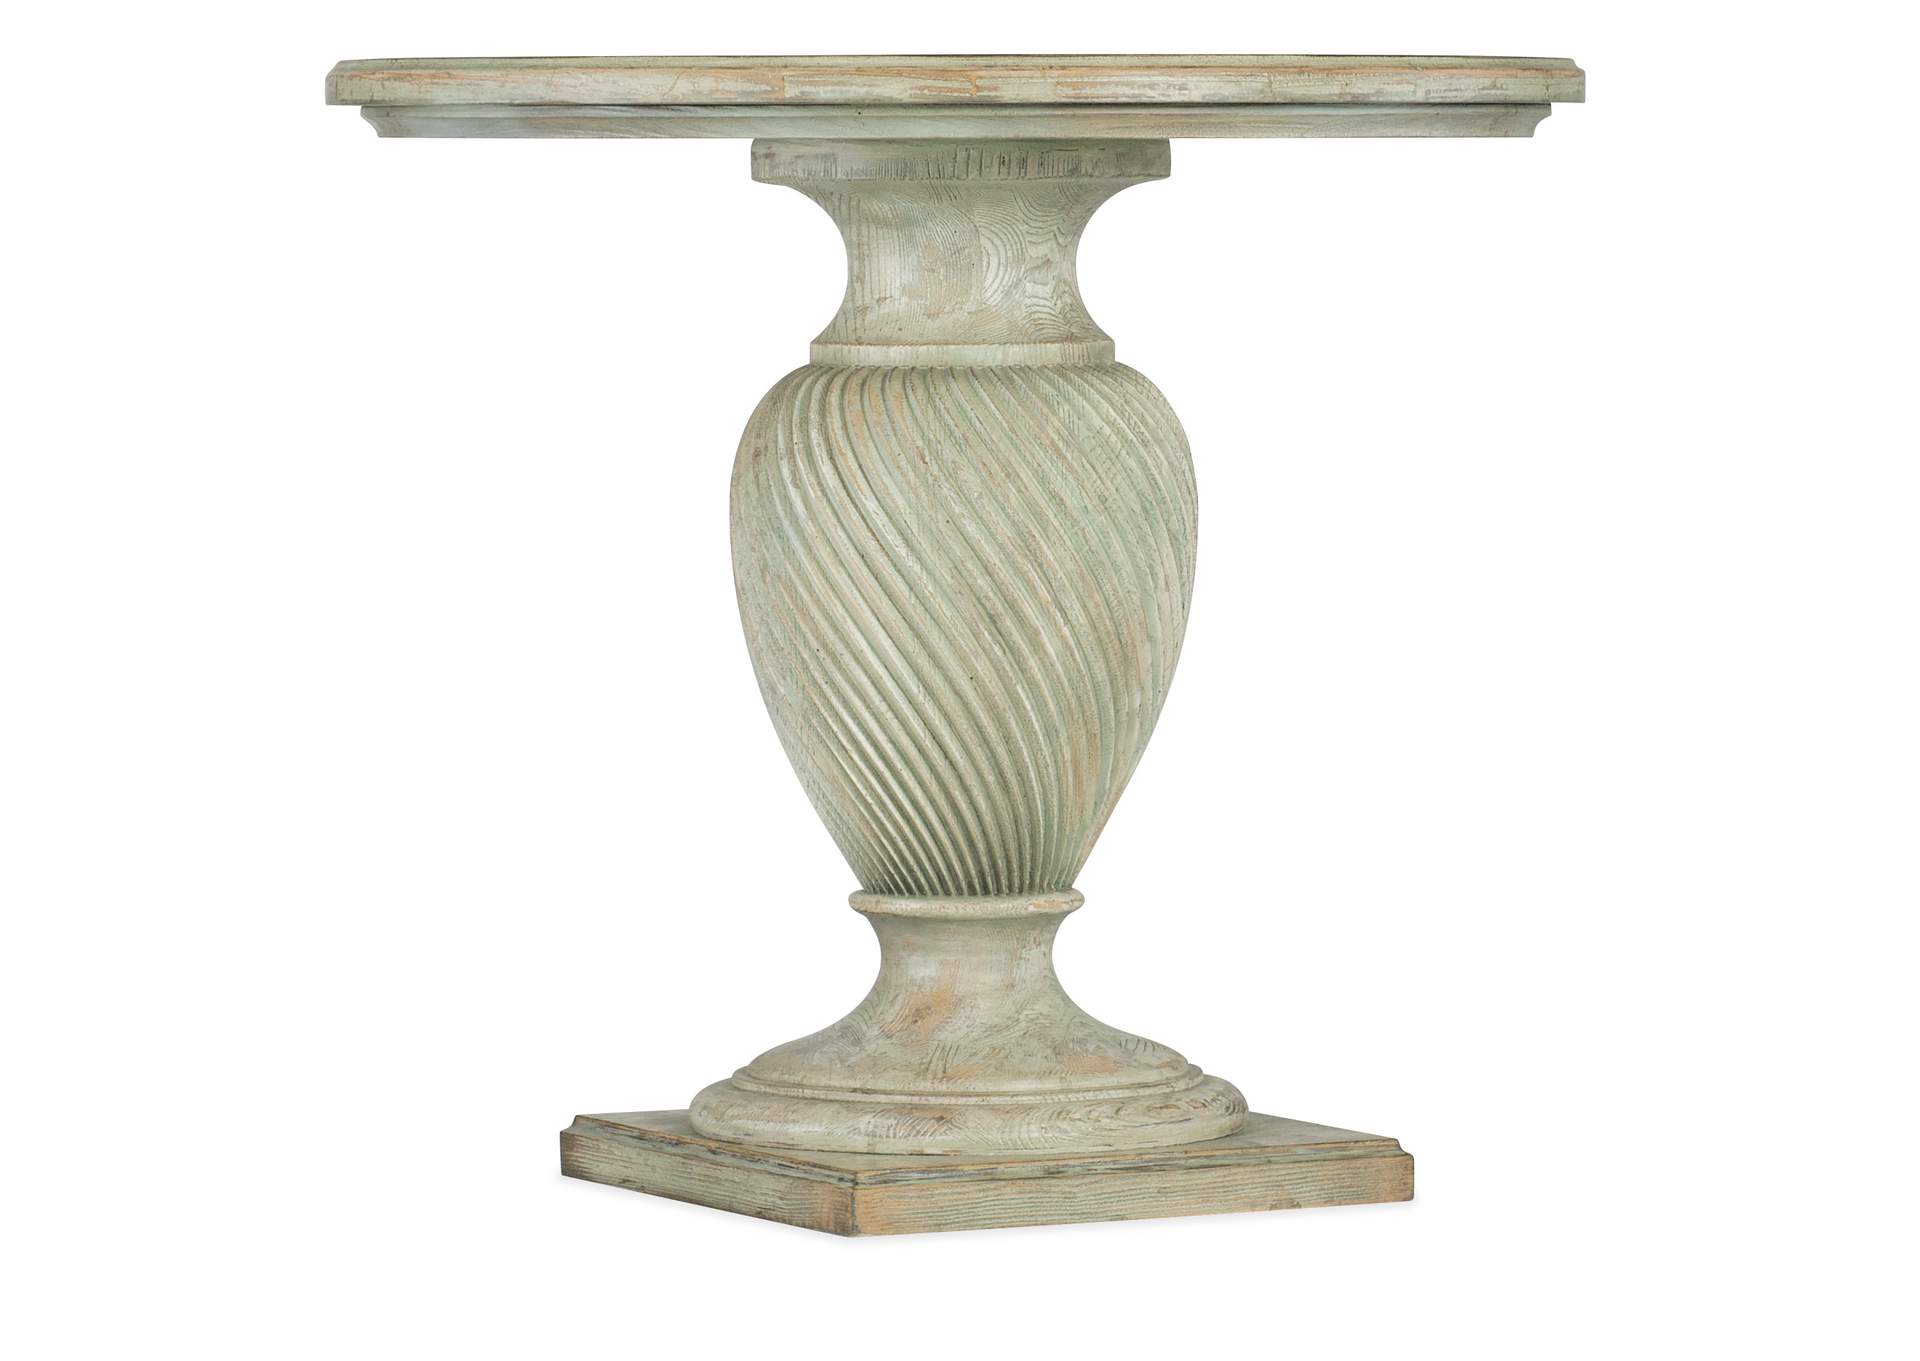 Traditions Round End Table,Hooker Furniture